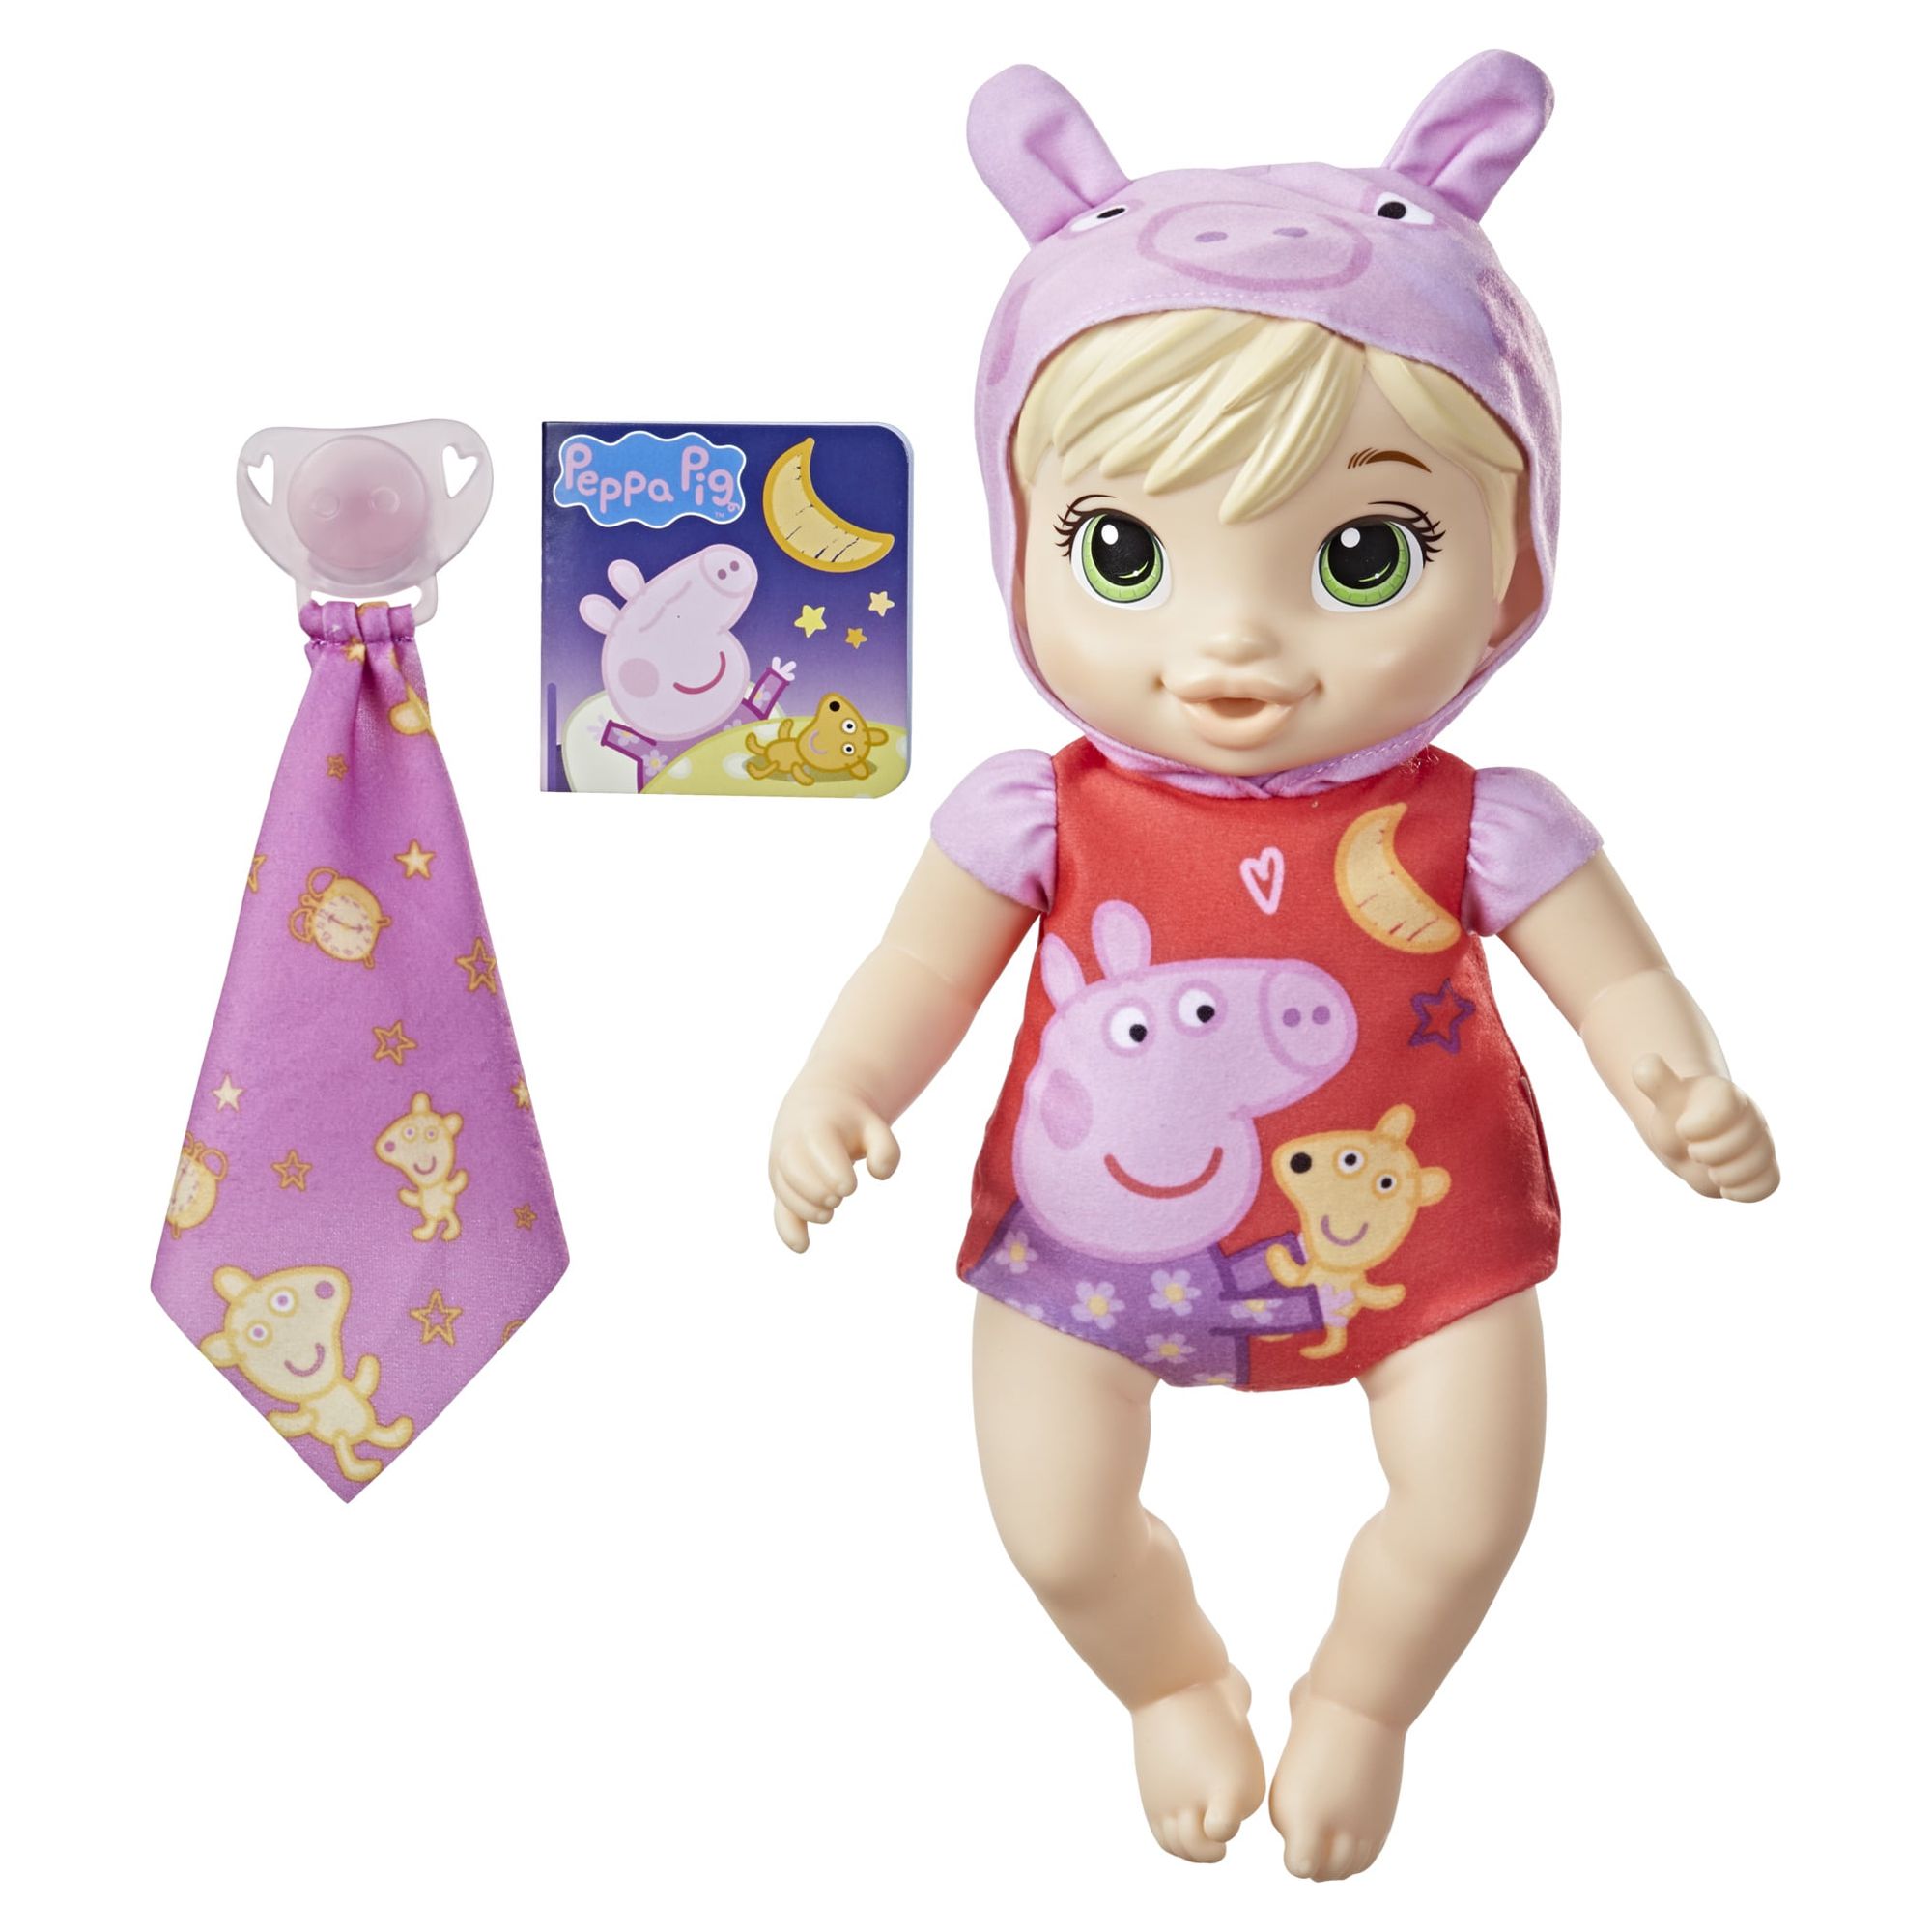 Baby Alive Goodnight Peppa Doll, Peppa Pig Toy, Blonde Hair, Only At Walmart - image 1 of 6